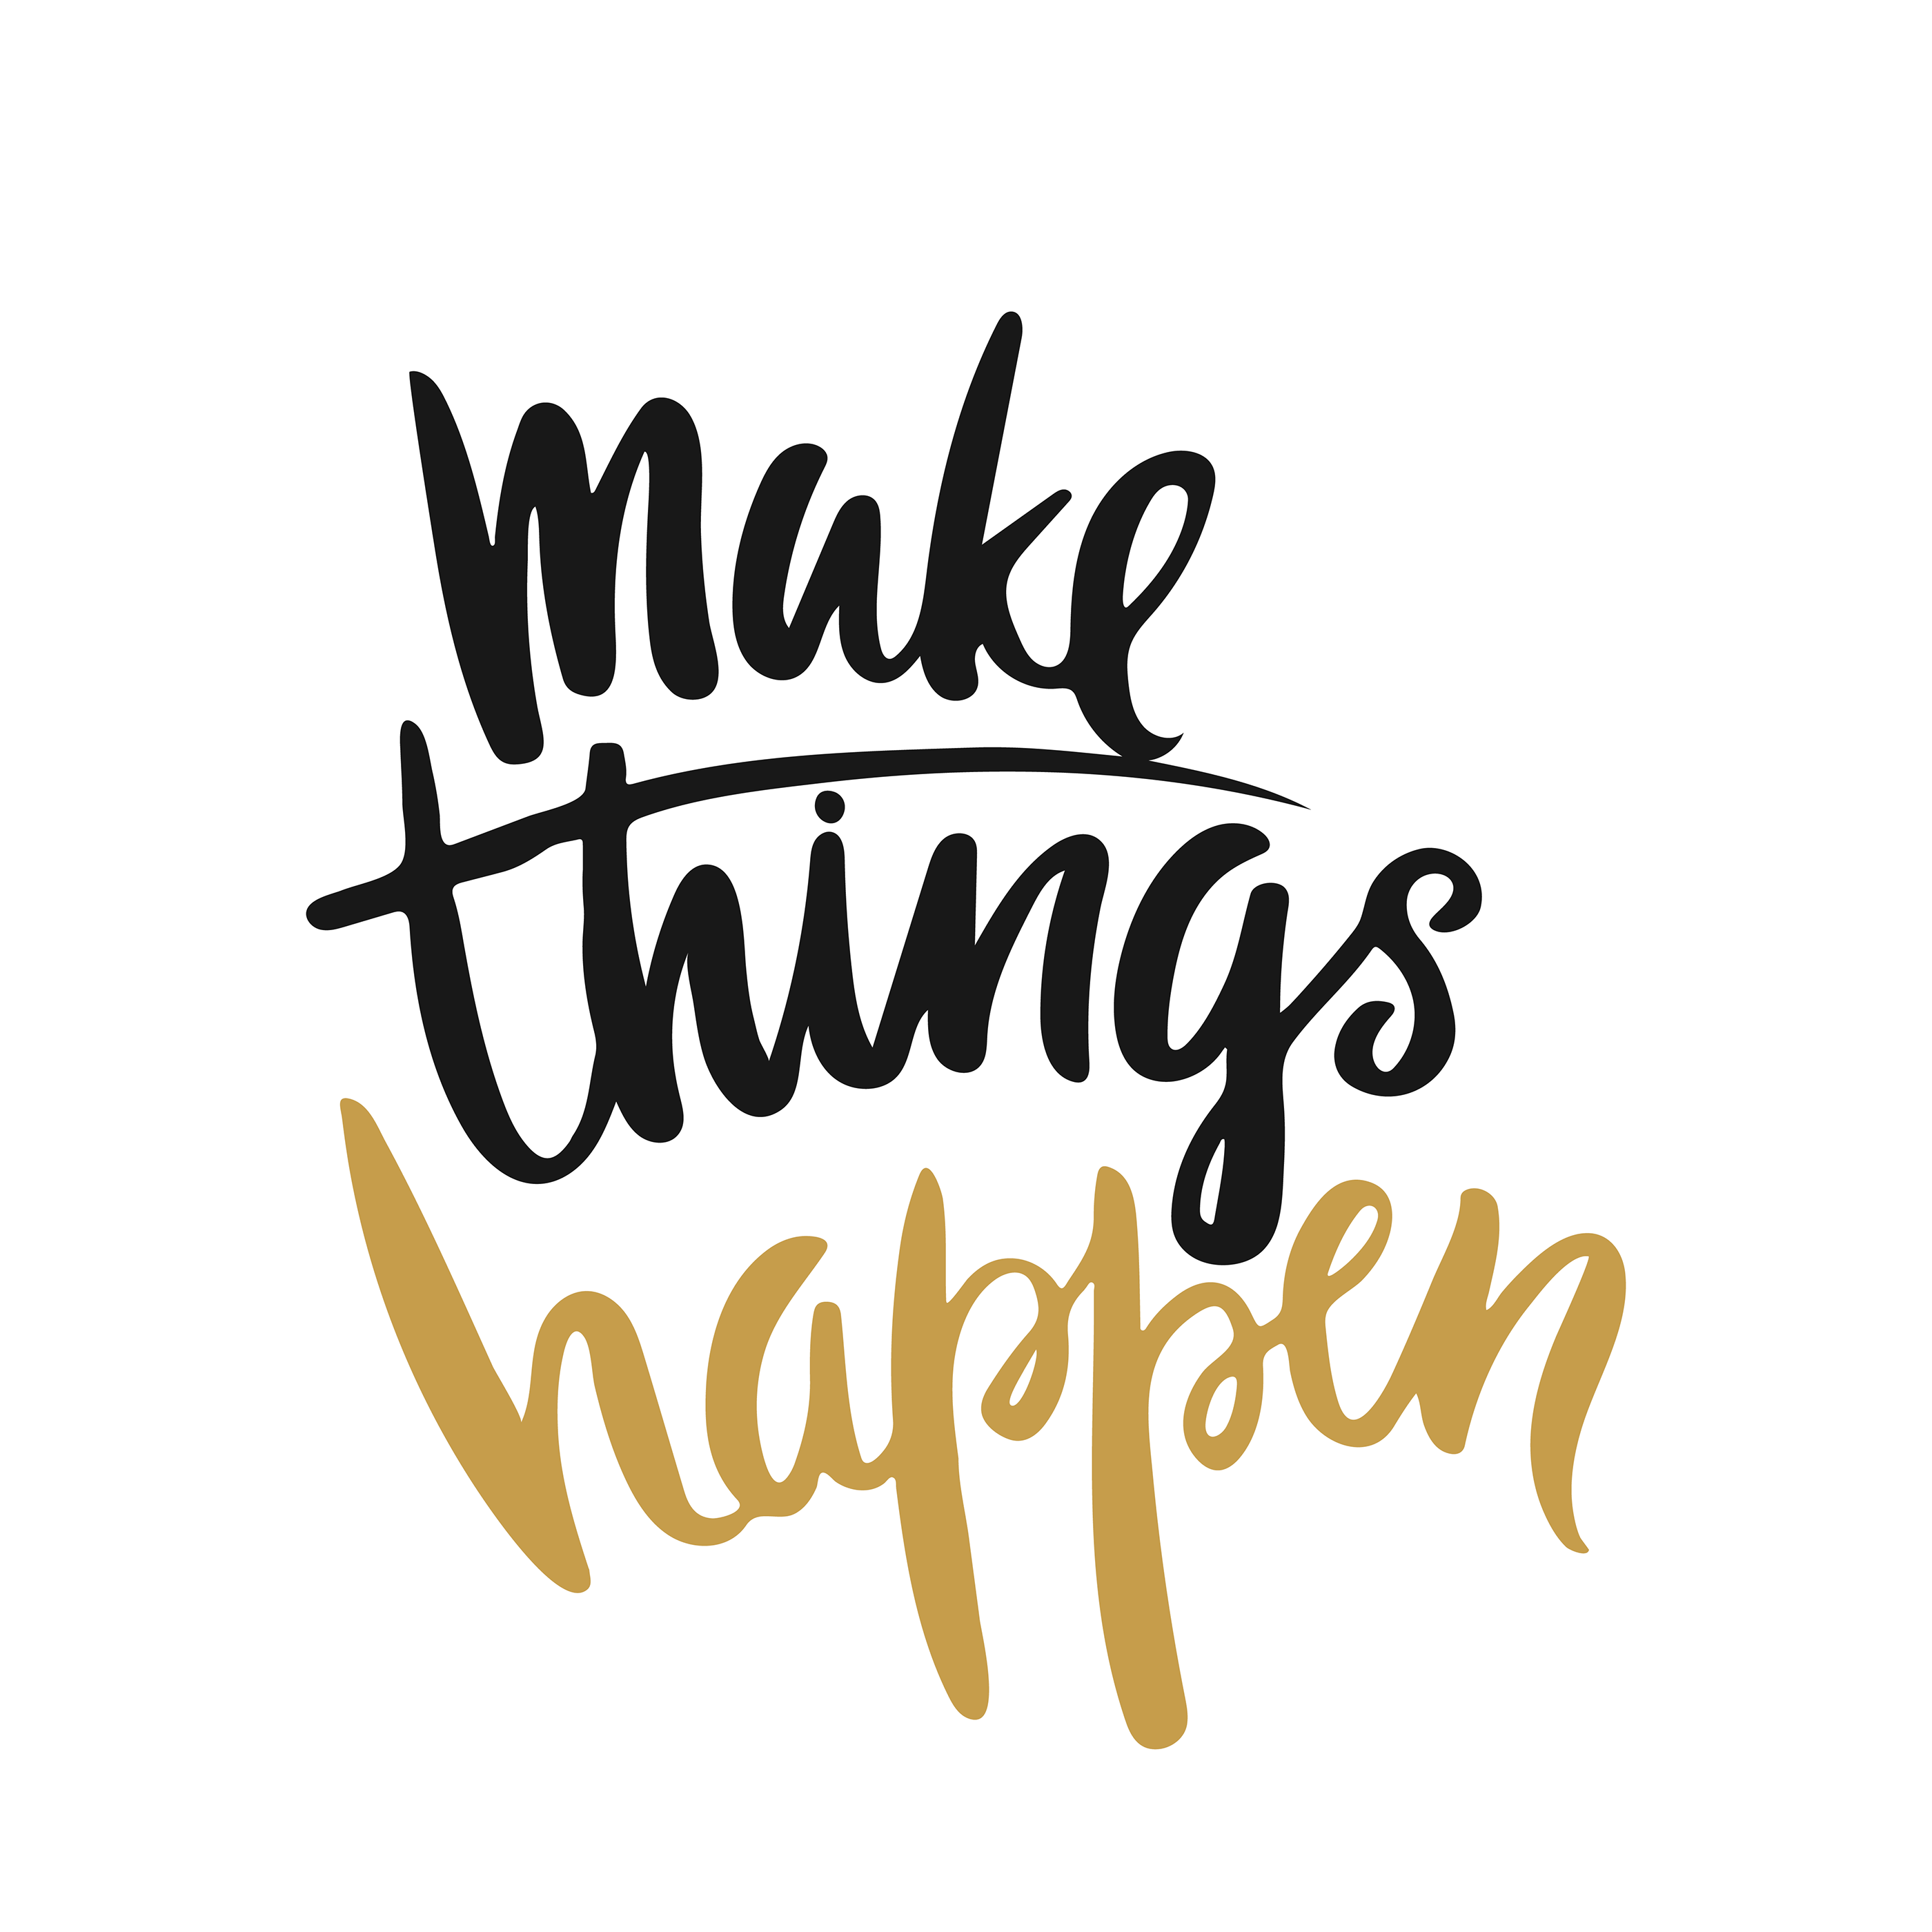 Things happen. Make things happen. Things happen обои. Lettering poster. Make your happen